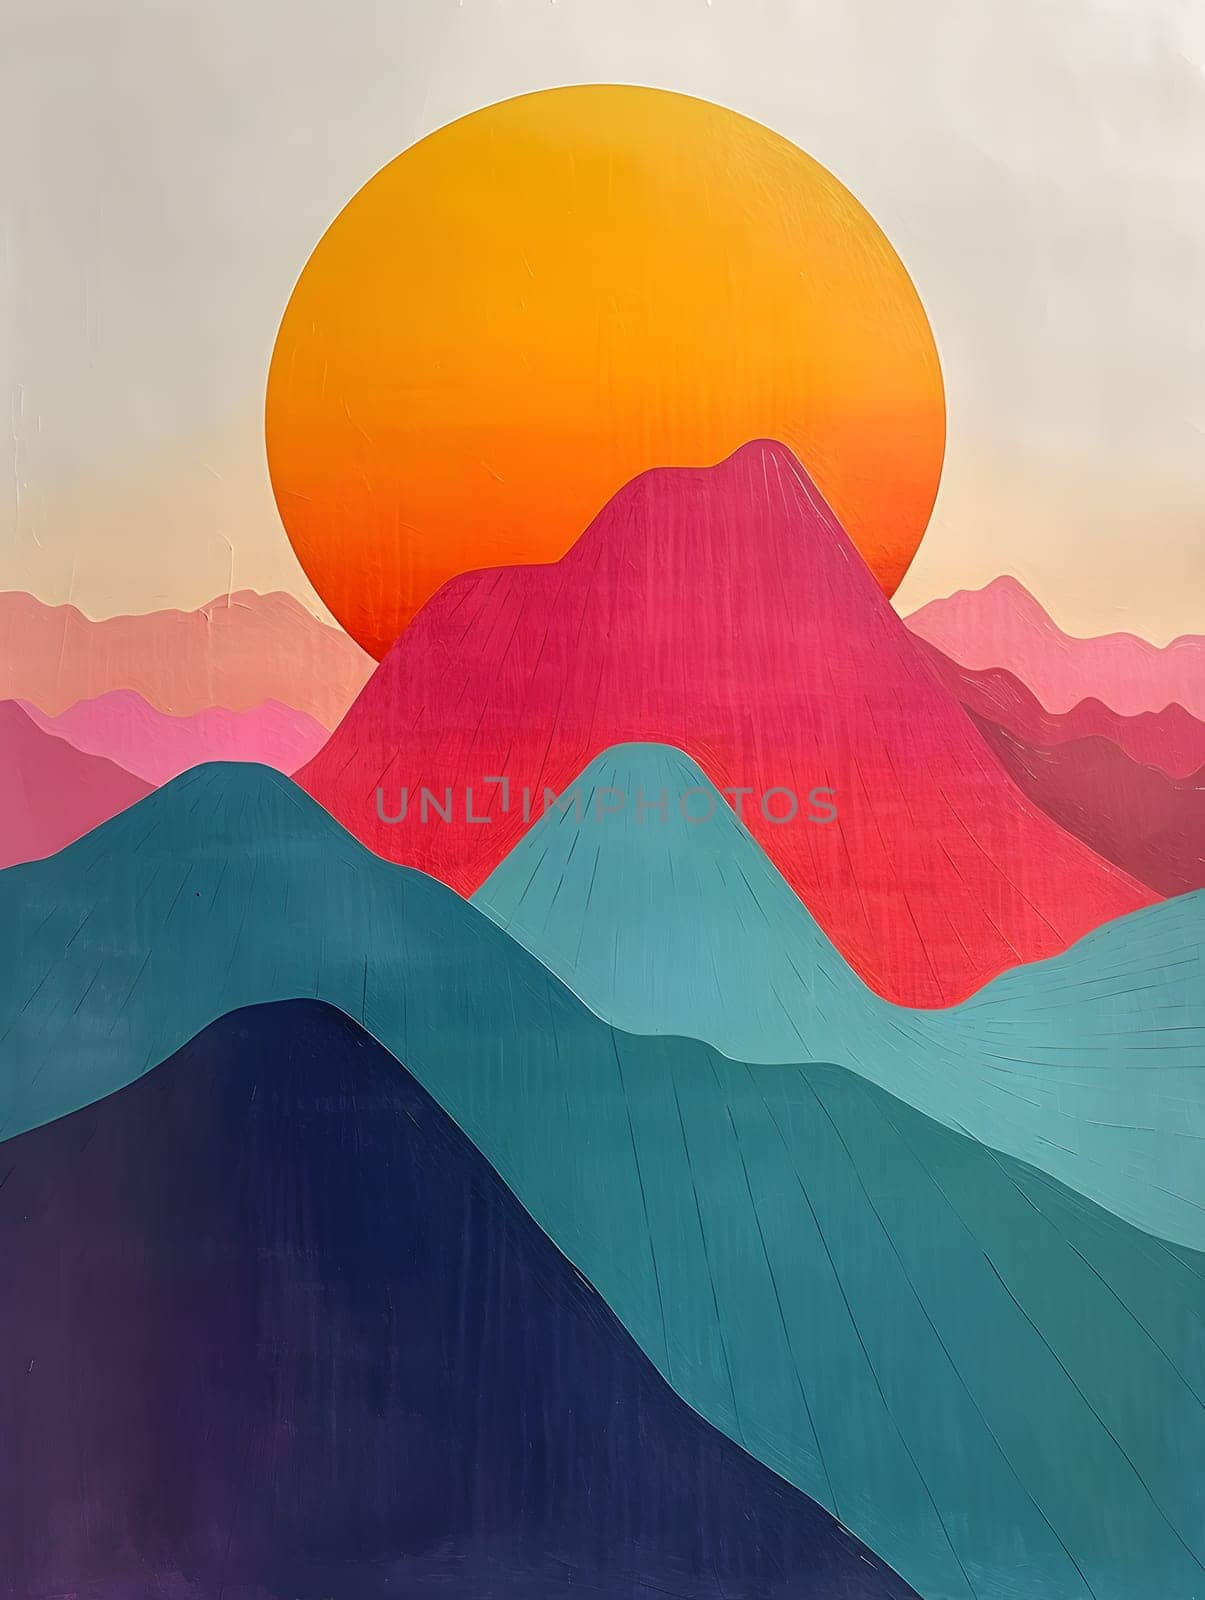 A breathtaking painting of a sunset over a mountain range, capturing the vivid orange hues in the sky and the tranquil atmosphere of the ecoregion landscape